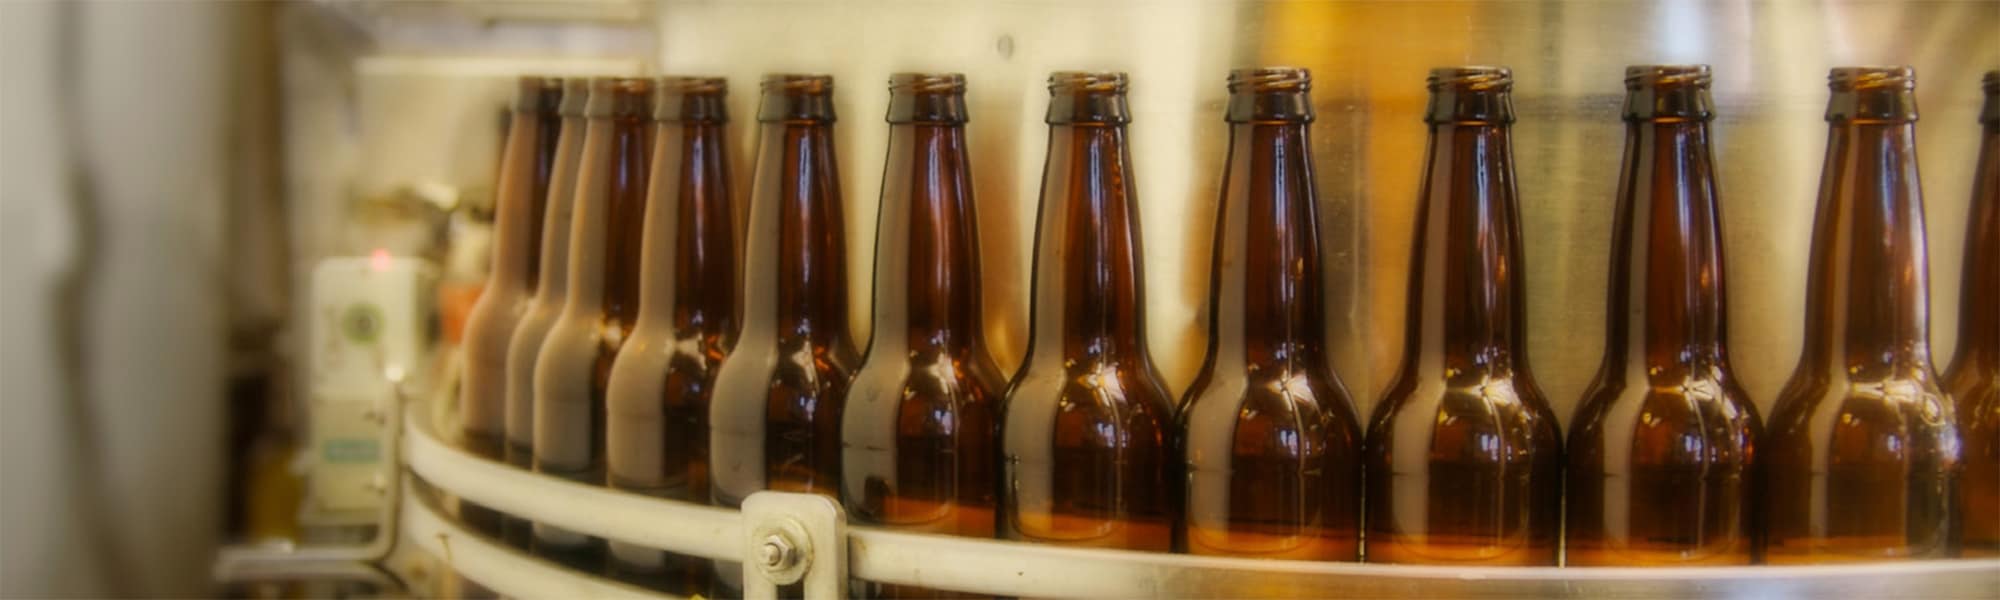 Brown bottles on a conveyor in a beverage processing plant